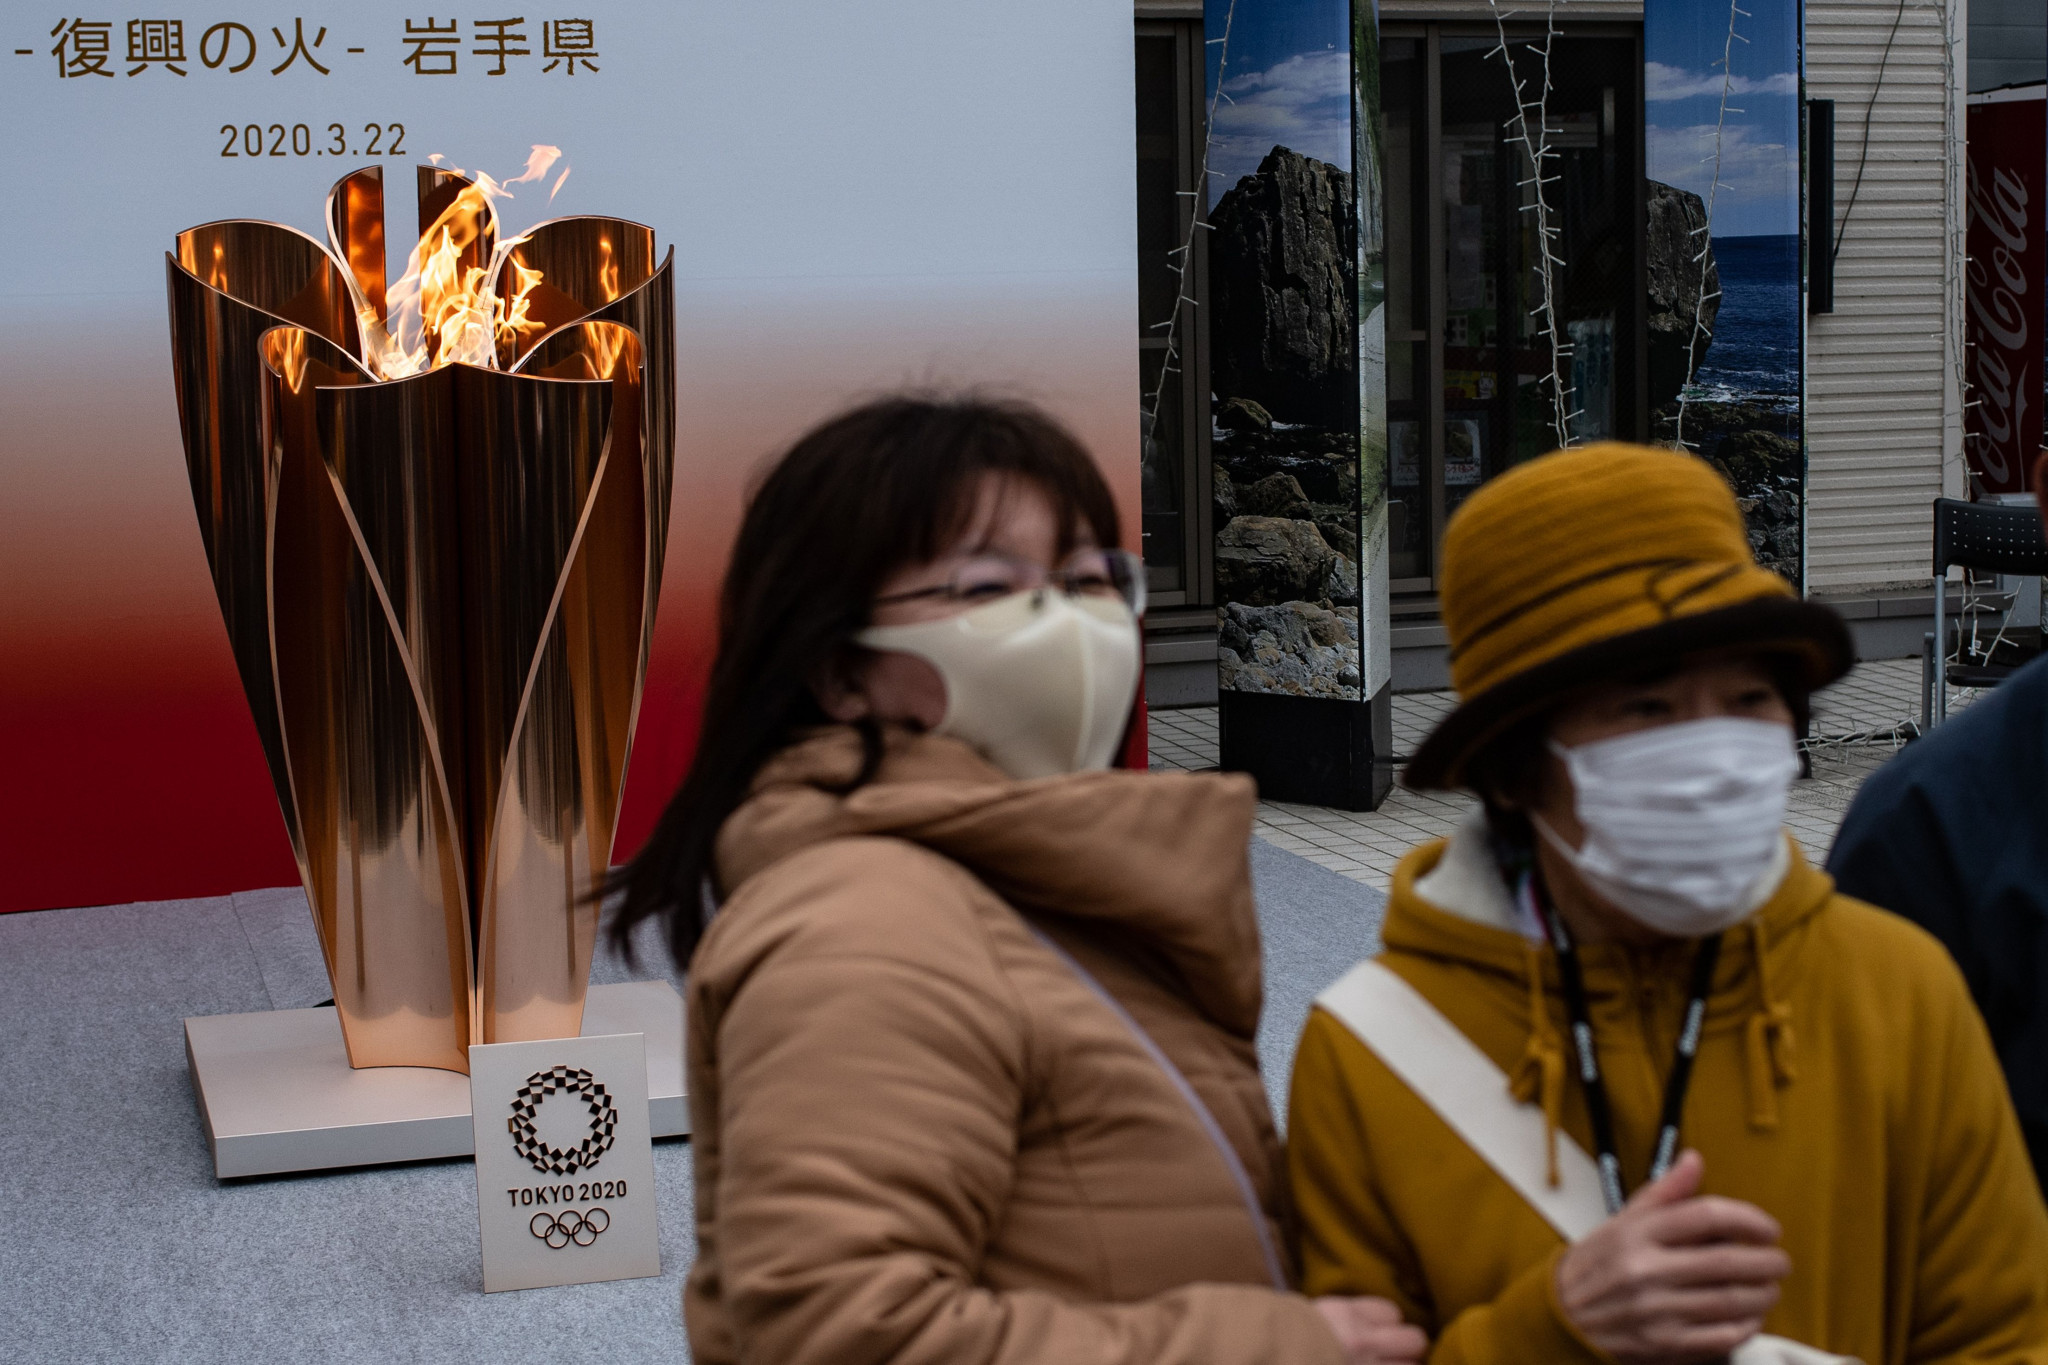 Large crowds viewed the Olympic Flame in Japan this weekend despite coronavirus advice ©Getty Images